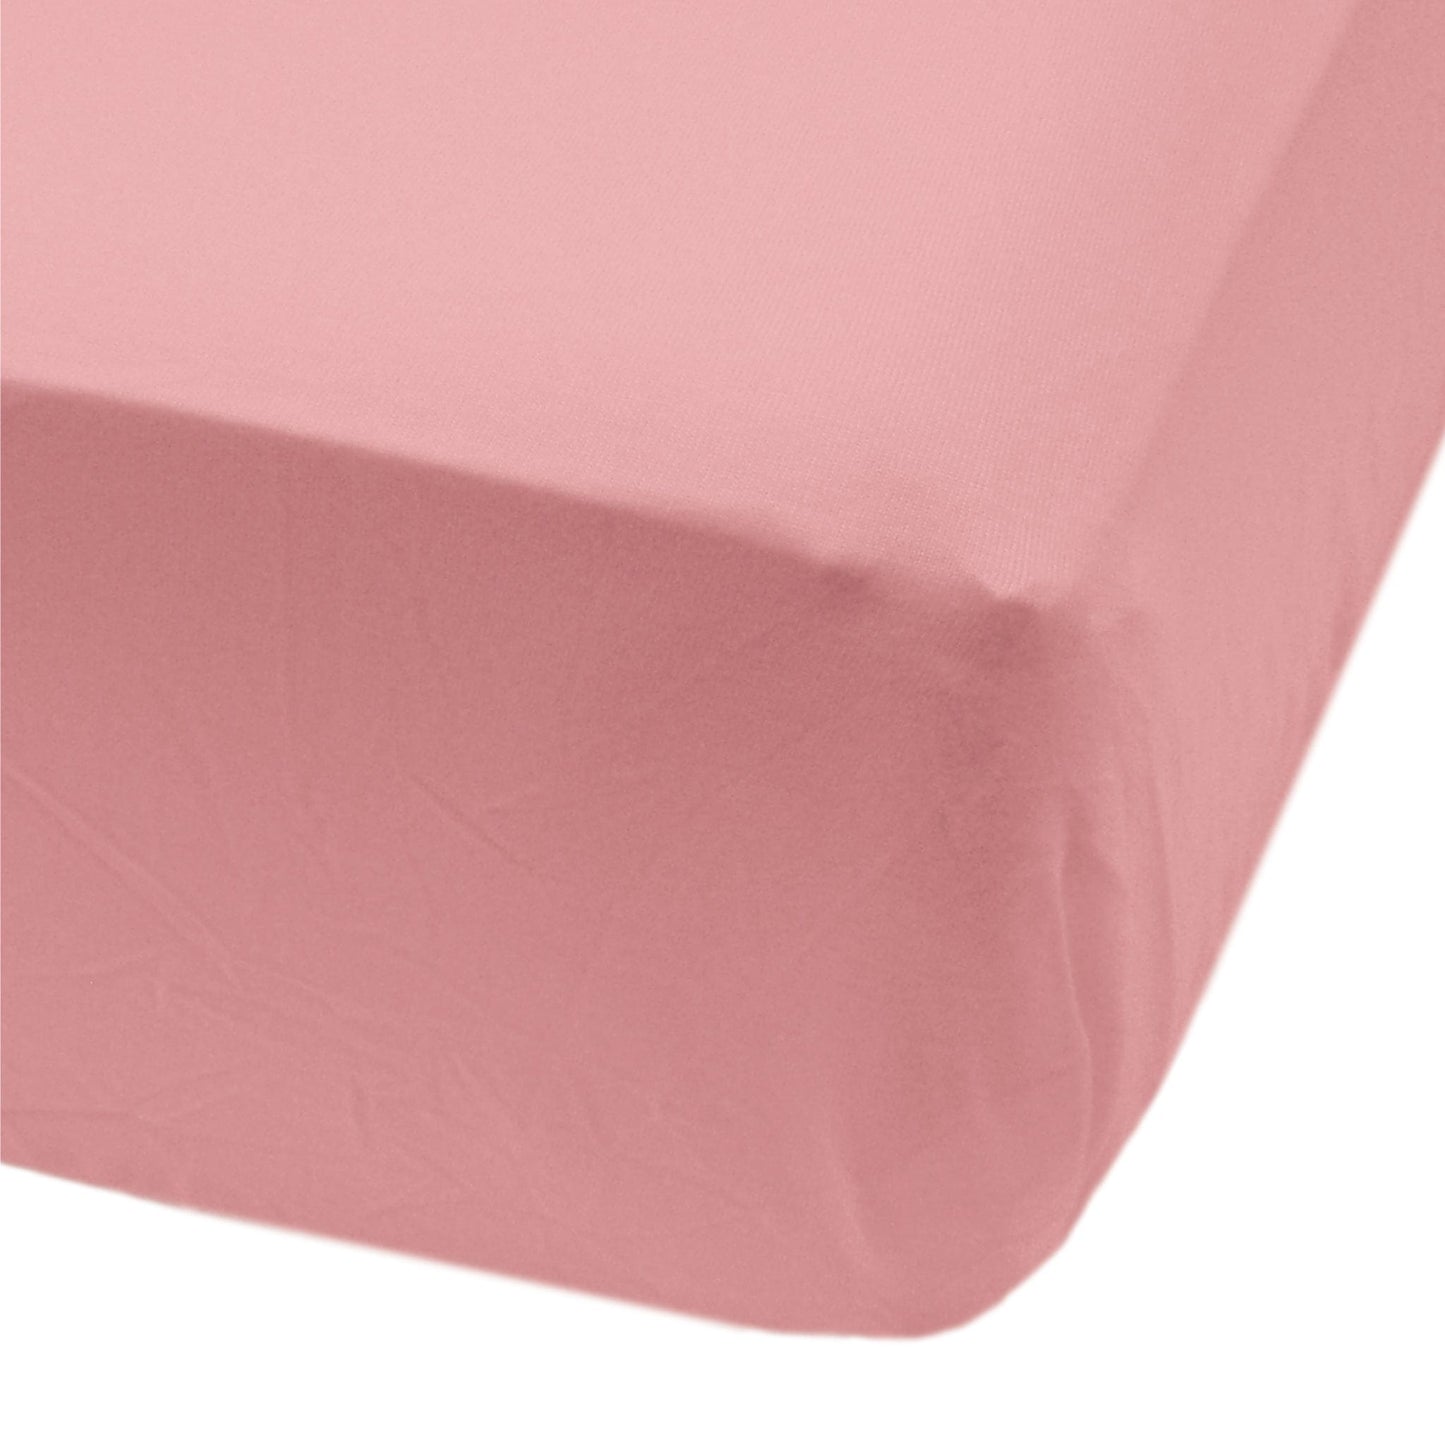 Crib fitted sheet - Petra